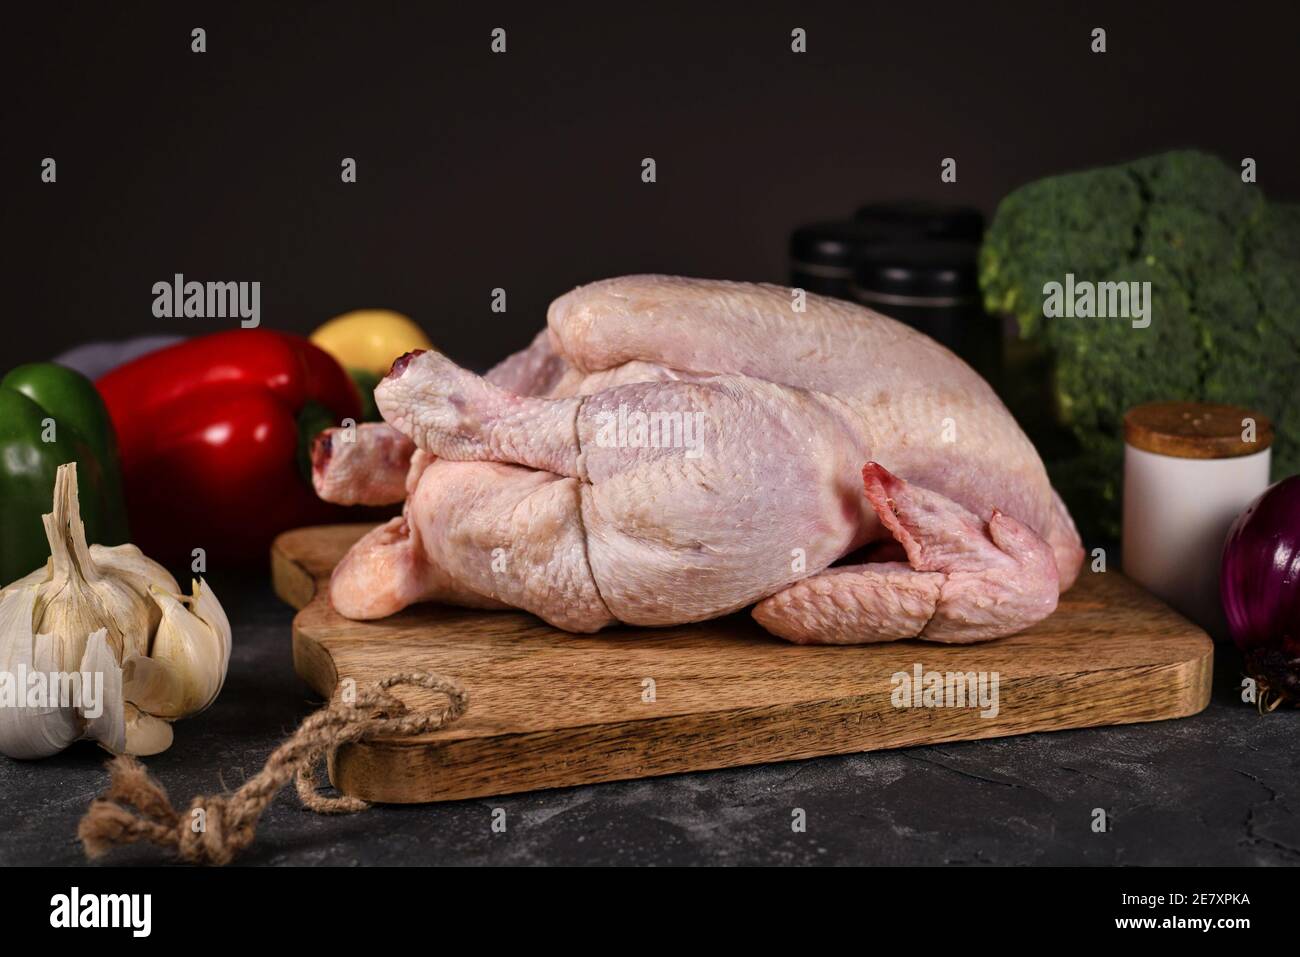 Raw chicken on cutting board surrounded by vegetable ingredients on dark background Stock Photo